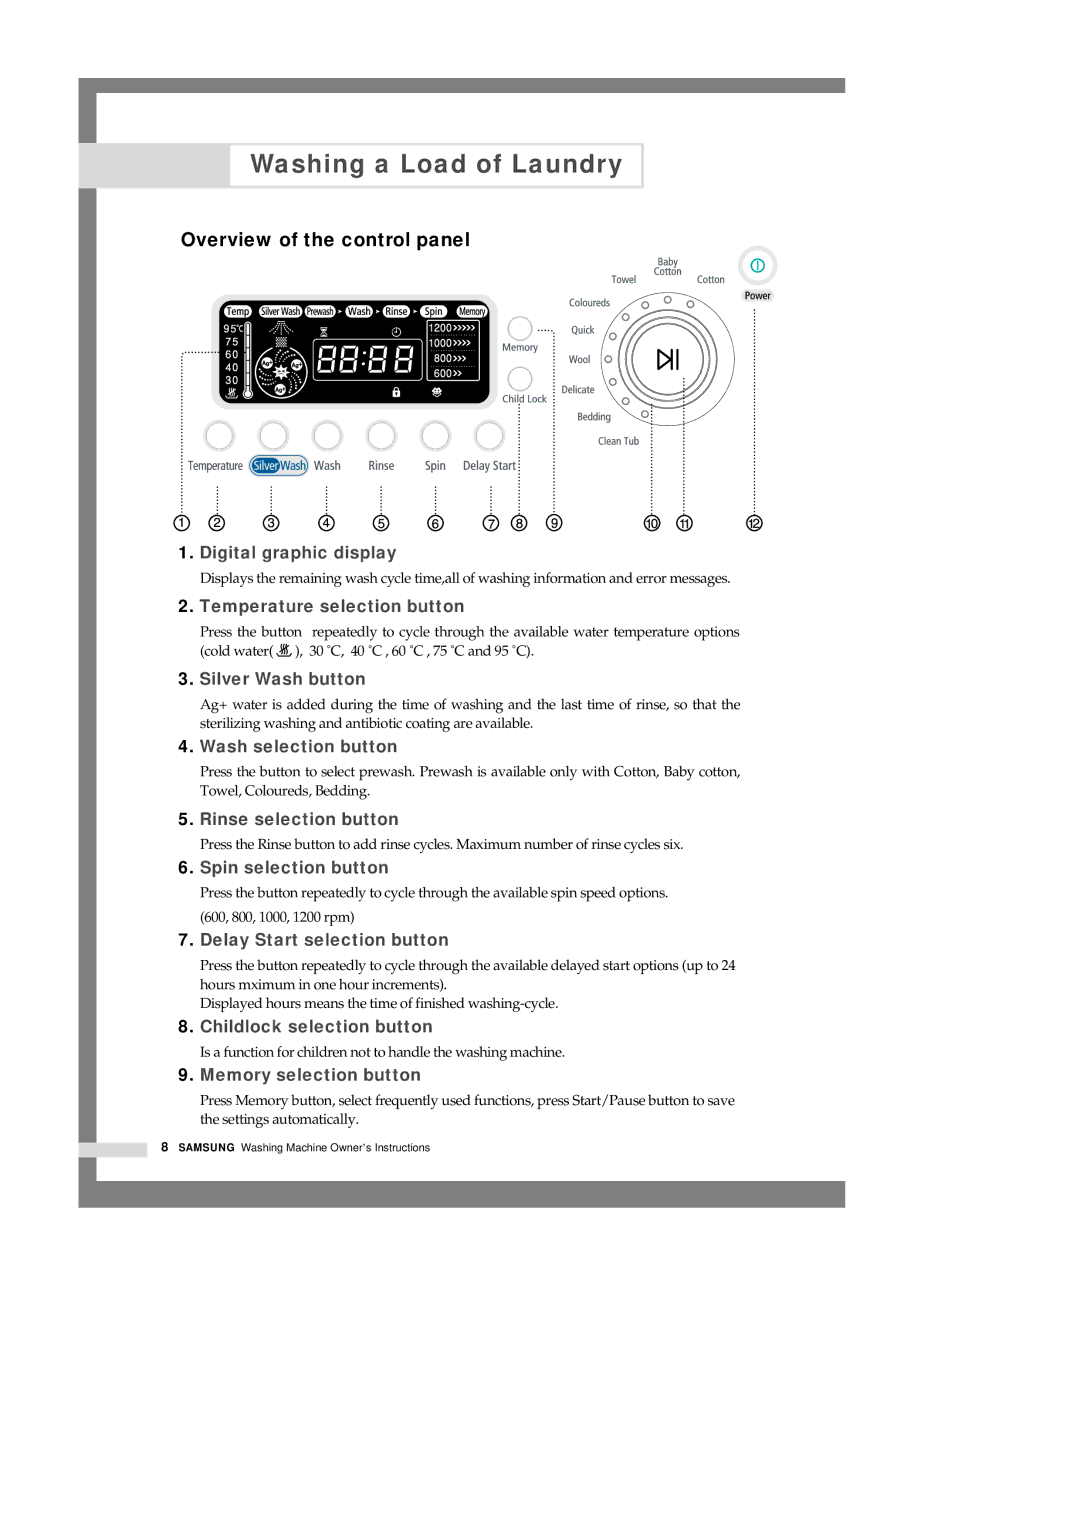 Samsung H1245AES/XSV, H1245AES-XSV, H1245AGS-XSP manual Overview of the control panel, Temperature selection button 